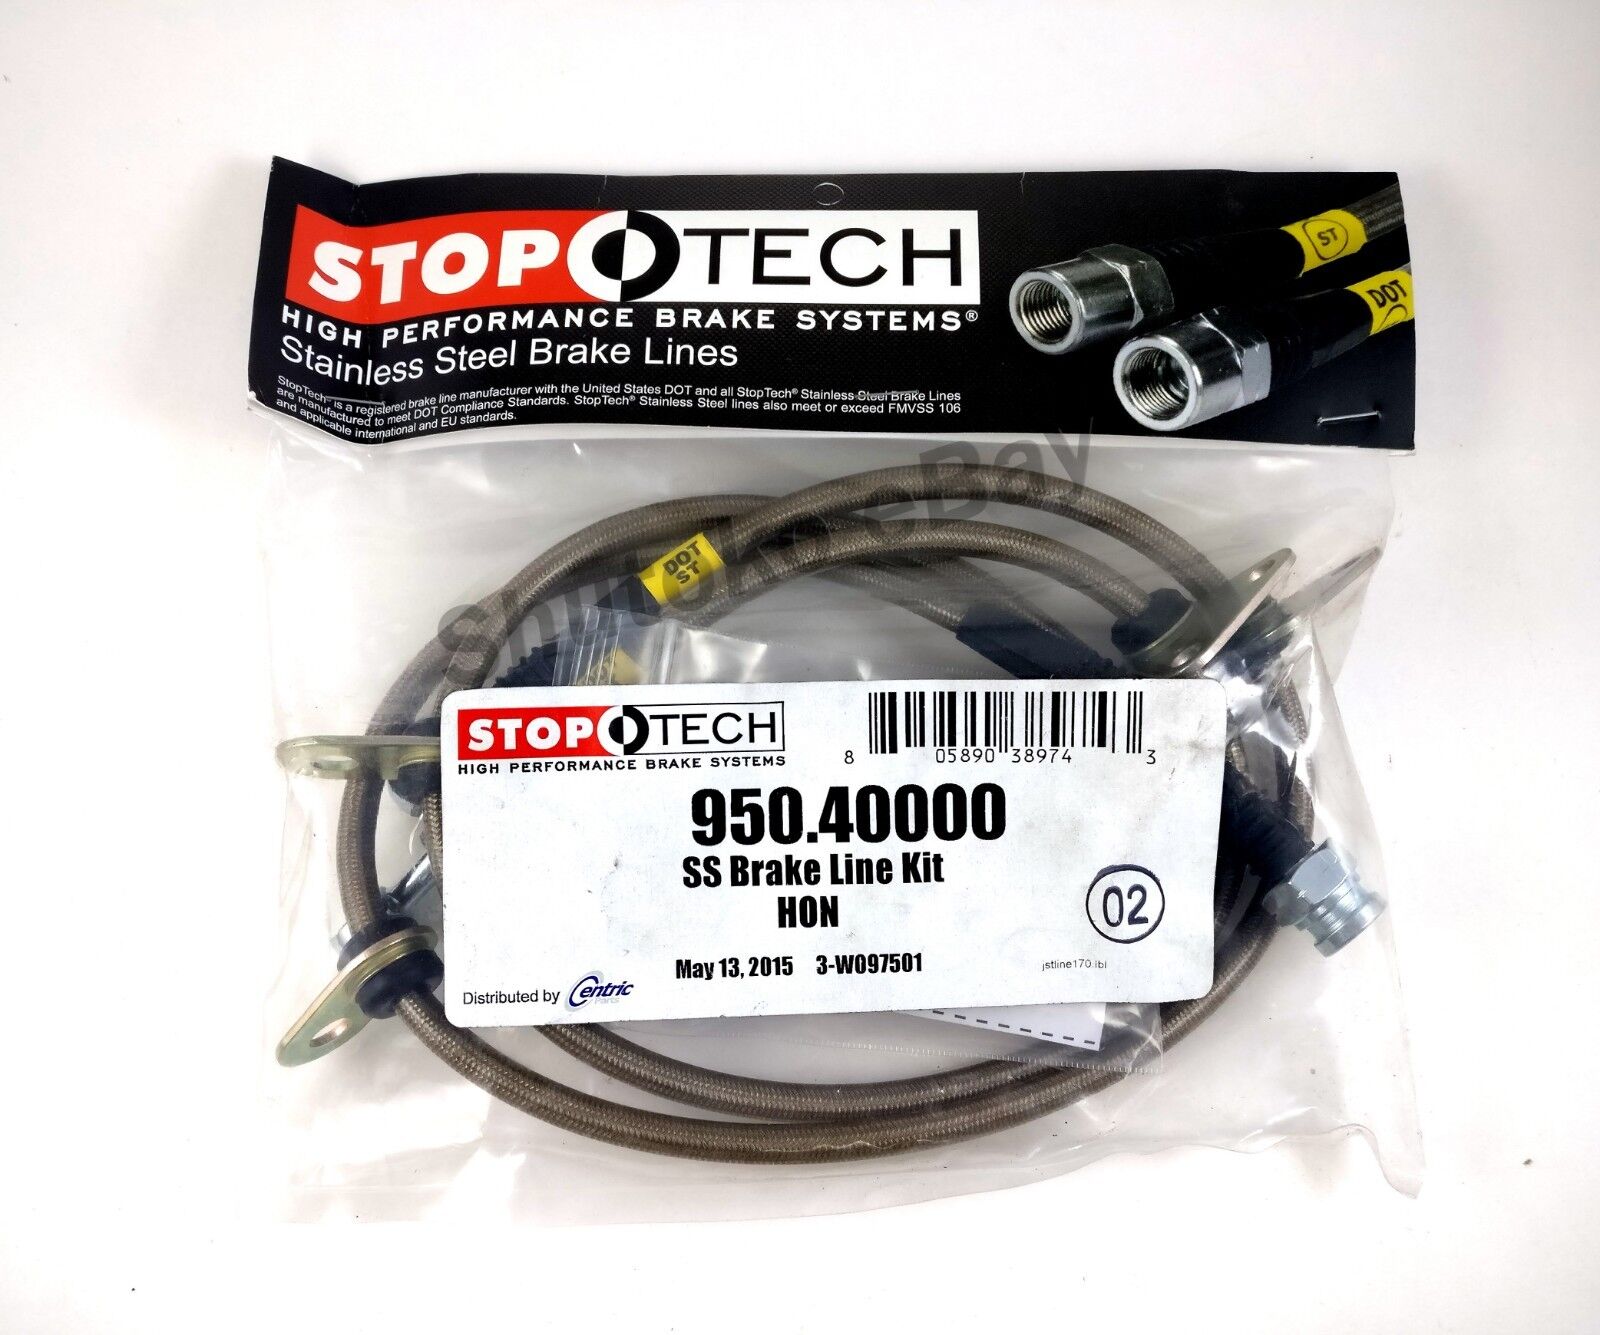 STOPTECH STAINLESS STEEL FRONT BRAKE LINES FOR 90-01 ACURA INTEGRA DA DB DC